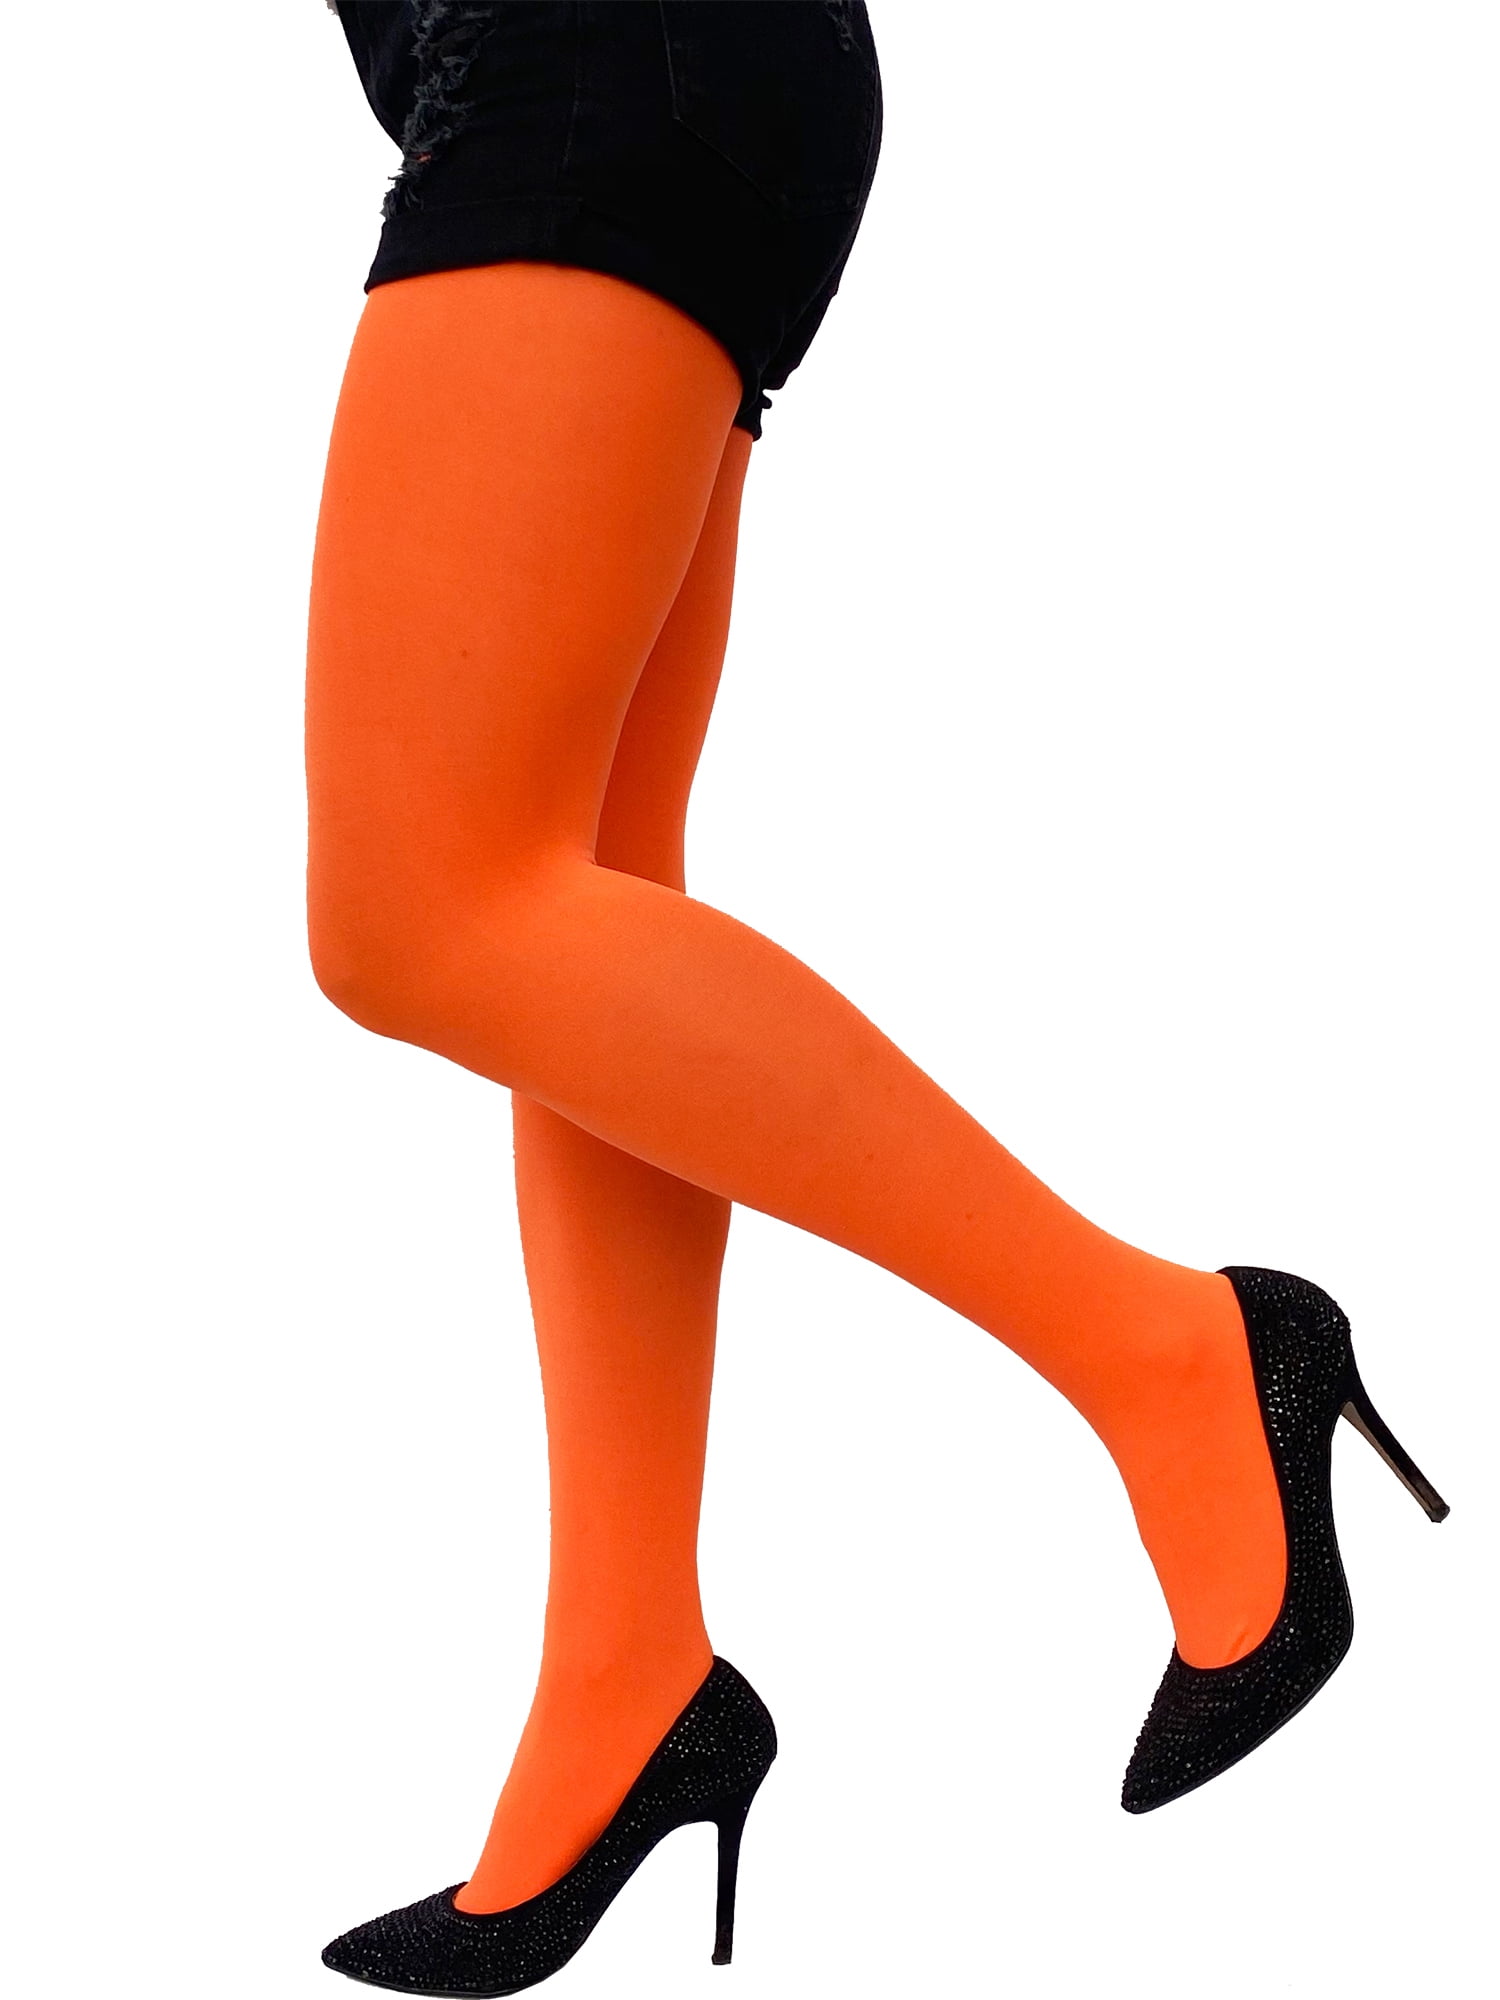 Amscan Footless Tights-Orange, Adult Size, 1 Pc 